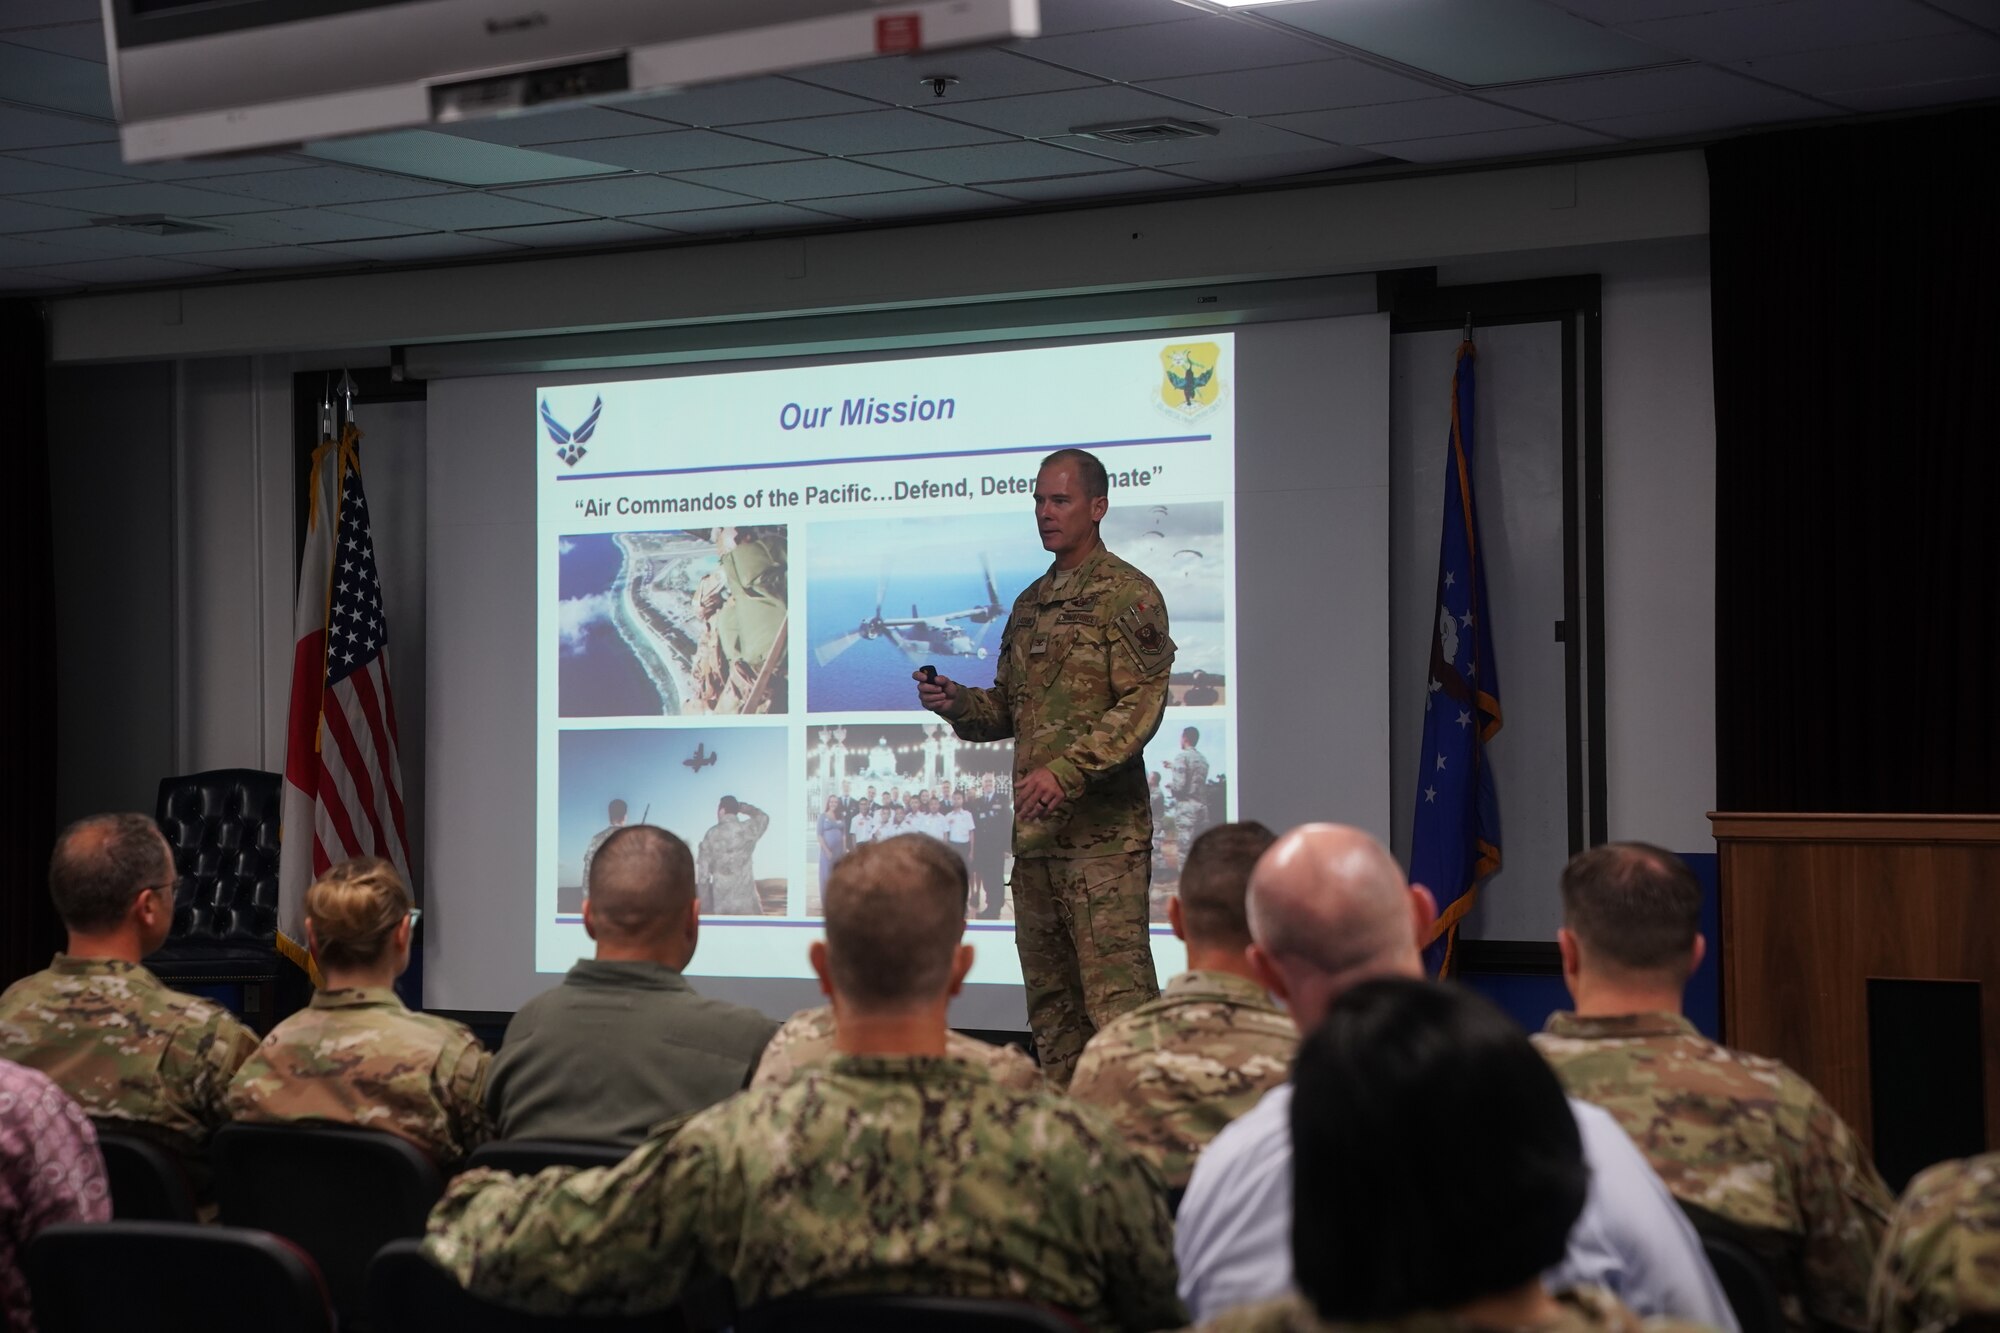 The 353rd Special Operations Group held a SOG Immersion Day for our U.S. military partners on 9 October, 2019. SOG Immersion Day is an opportunity to build upon our relationships with the 18th Wing and other joint leaders in Okinawa.